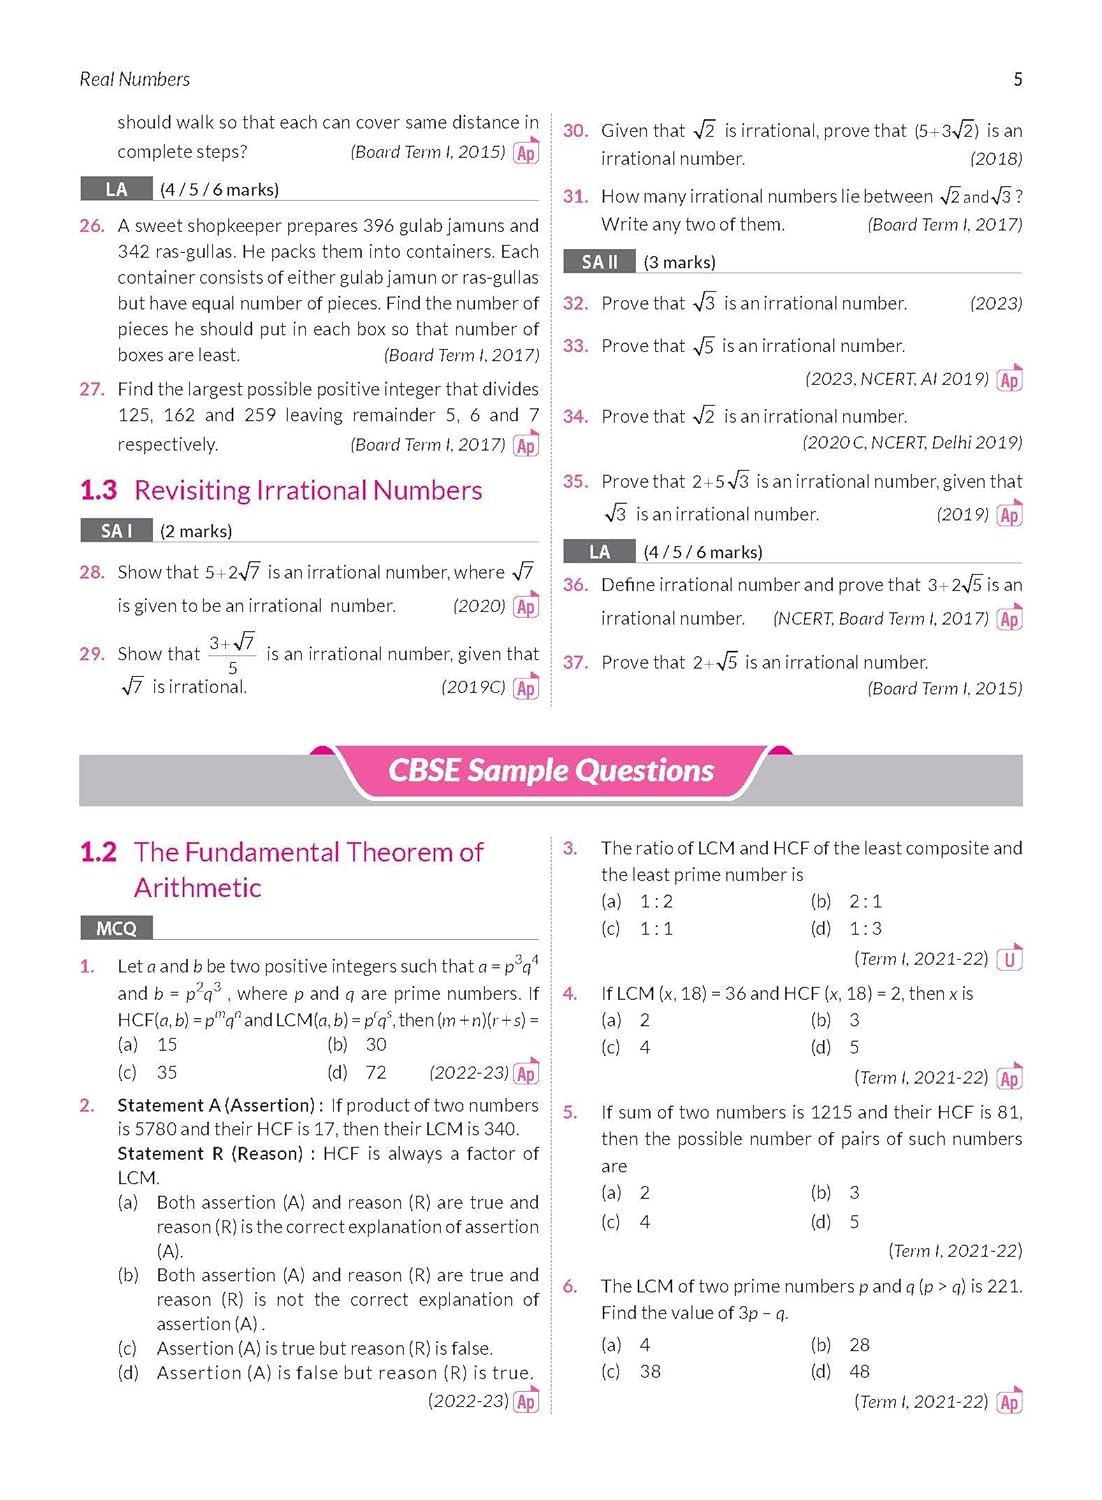 MTG CBSE 10 Years Chapterwise Topicwise Solved Papers Mathematics Standard For Class 10 - Latest for 2024-25 Session